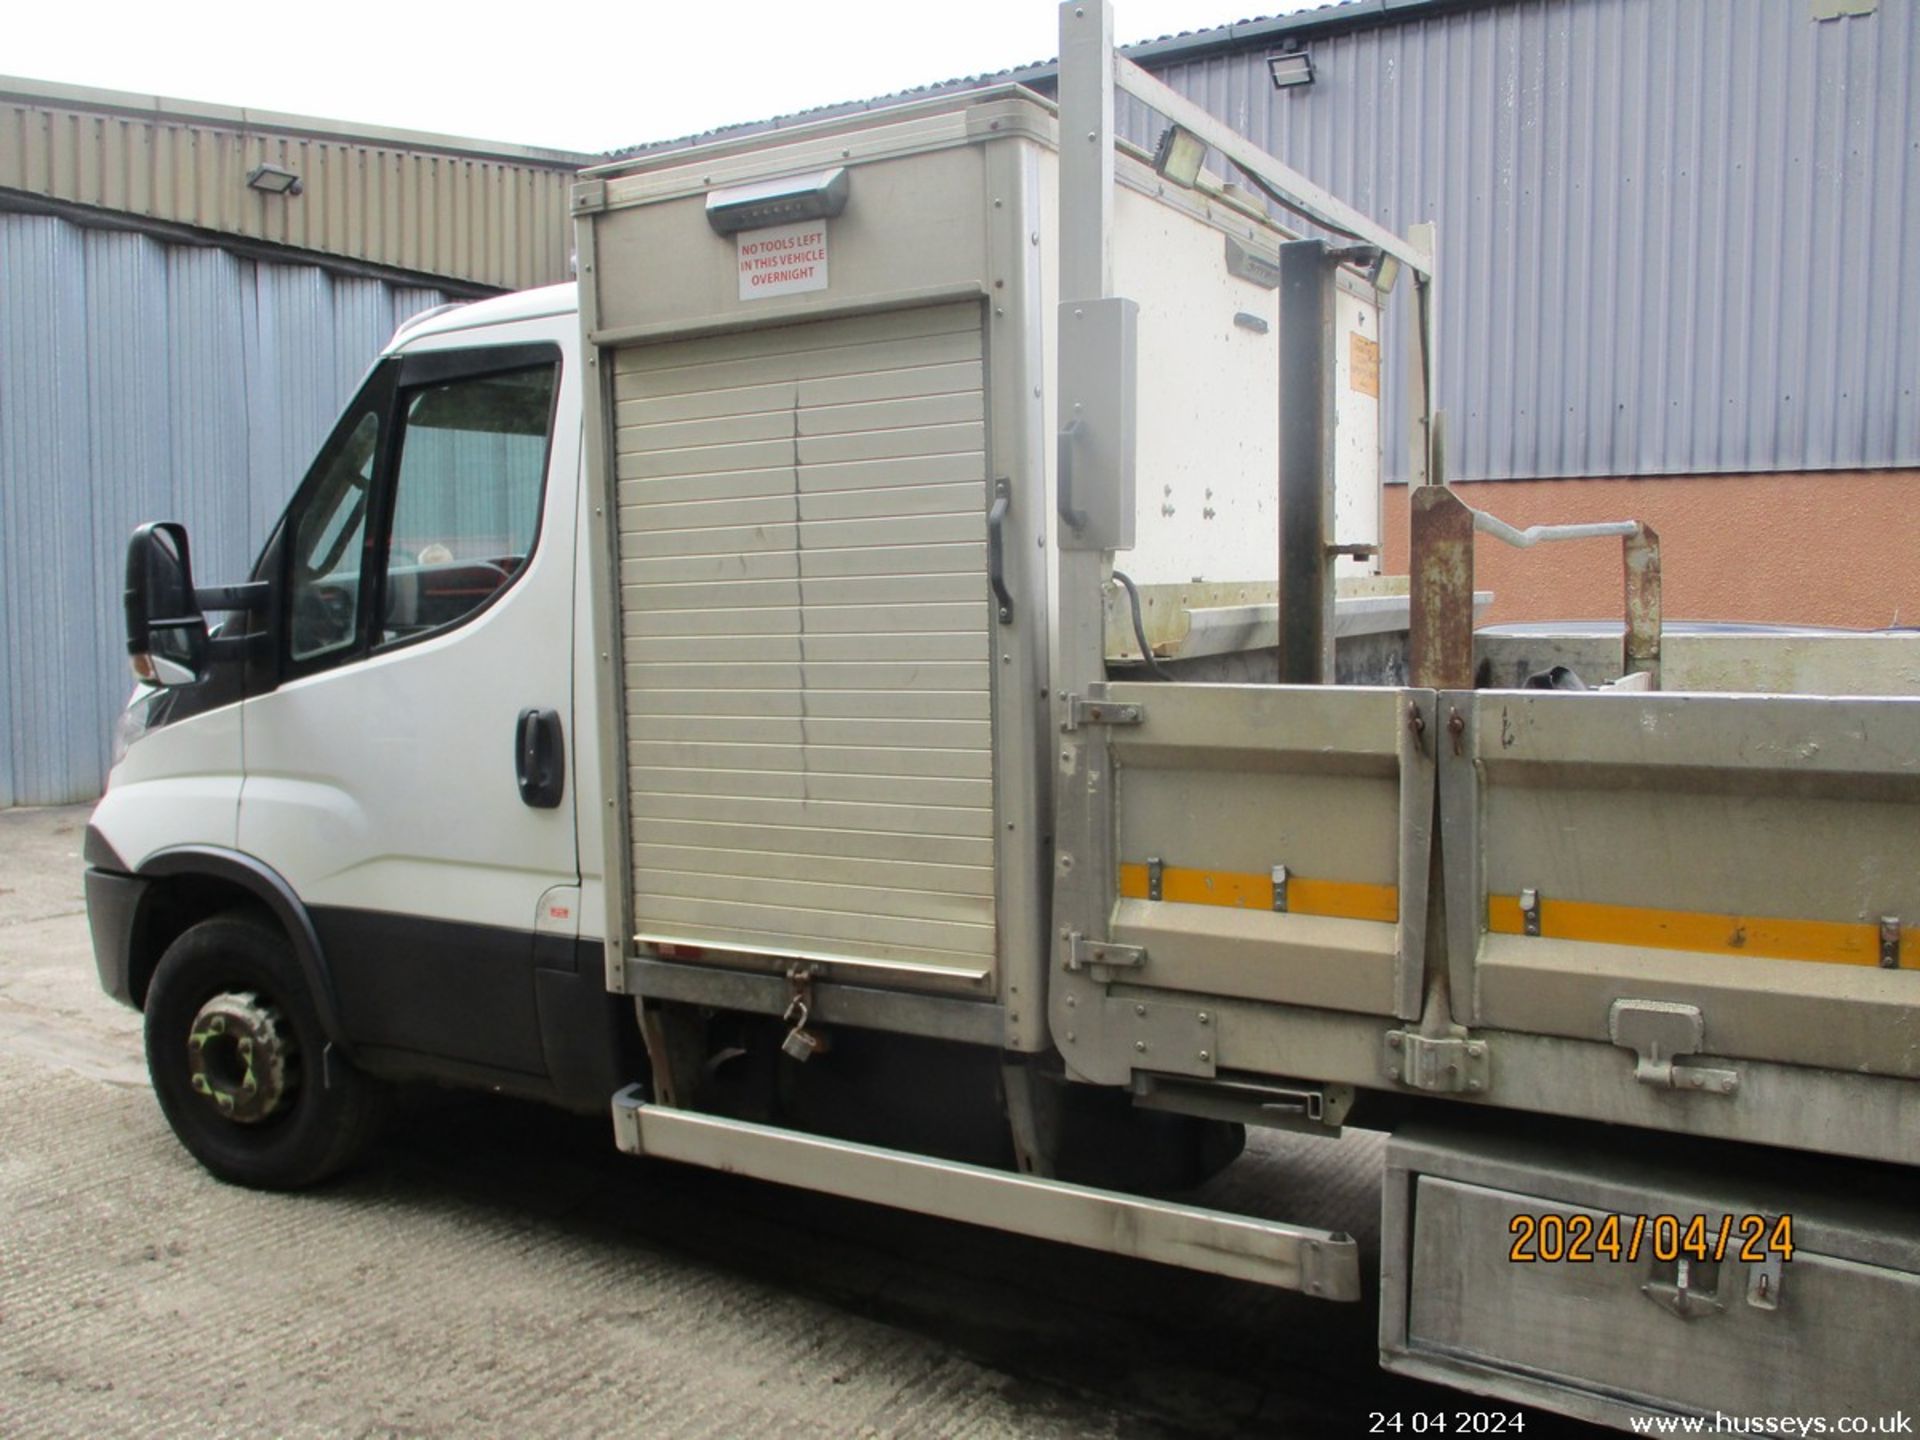 16/16 IVECO DAILY 70C17 - 2998cc 2dr Tipper (White, 193k) - Image 14 of 28